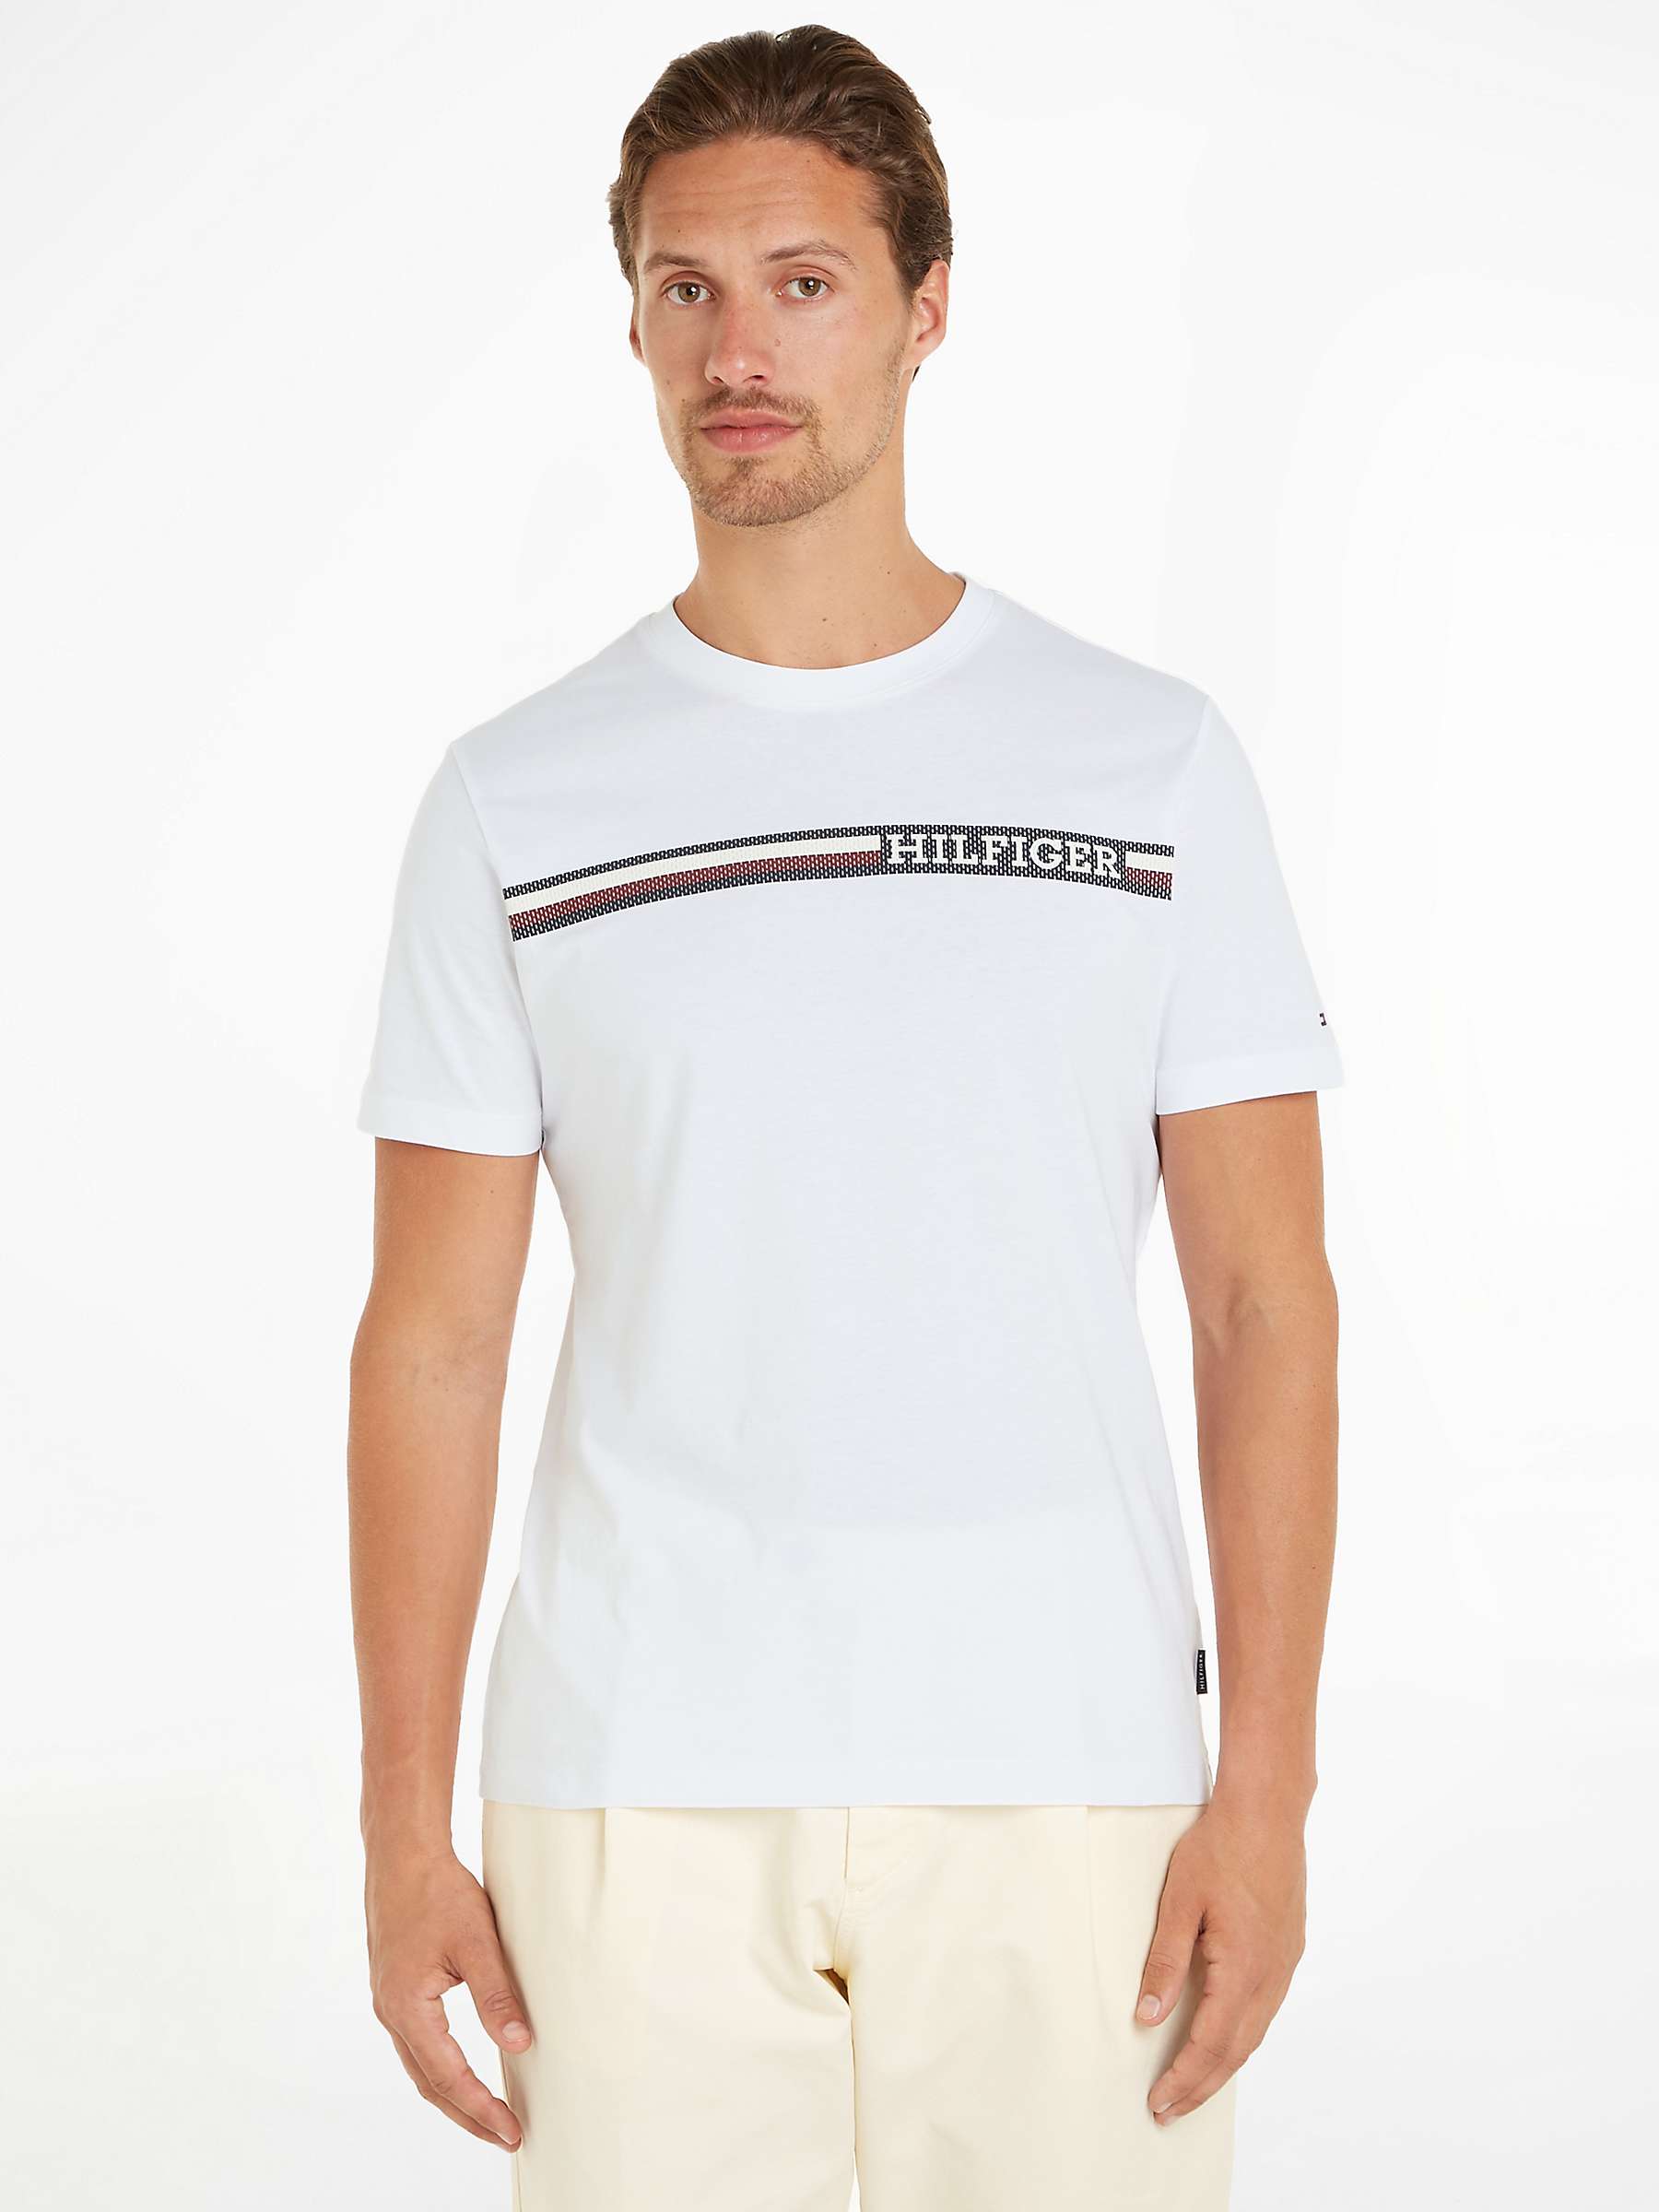 Buy Tommy Hilfiger Monotype Chest Strip T-Shirt Online at johnlewis.com